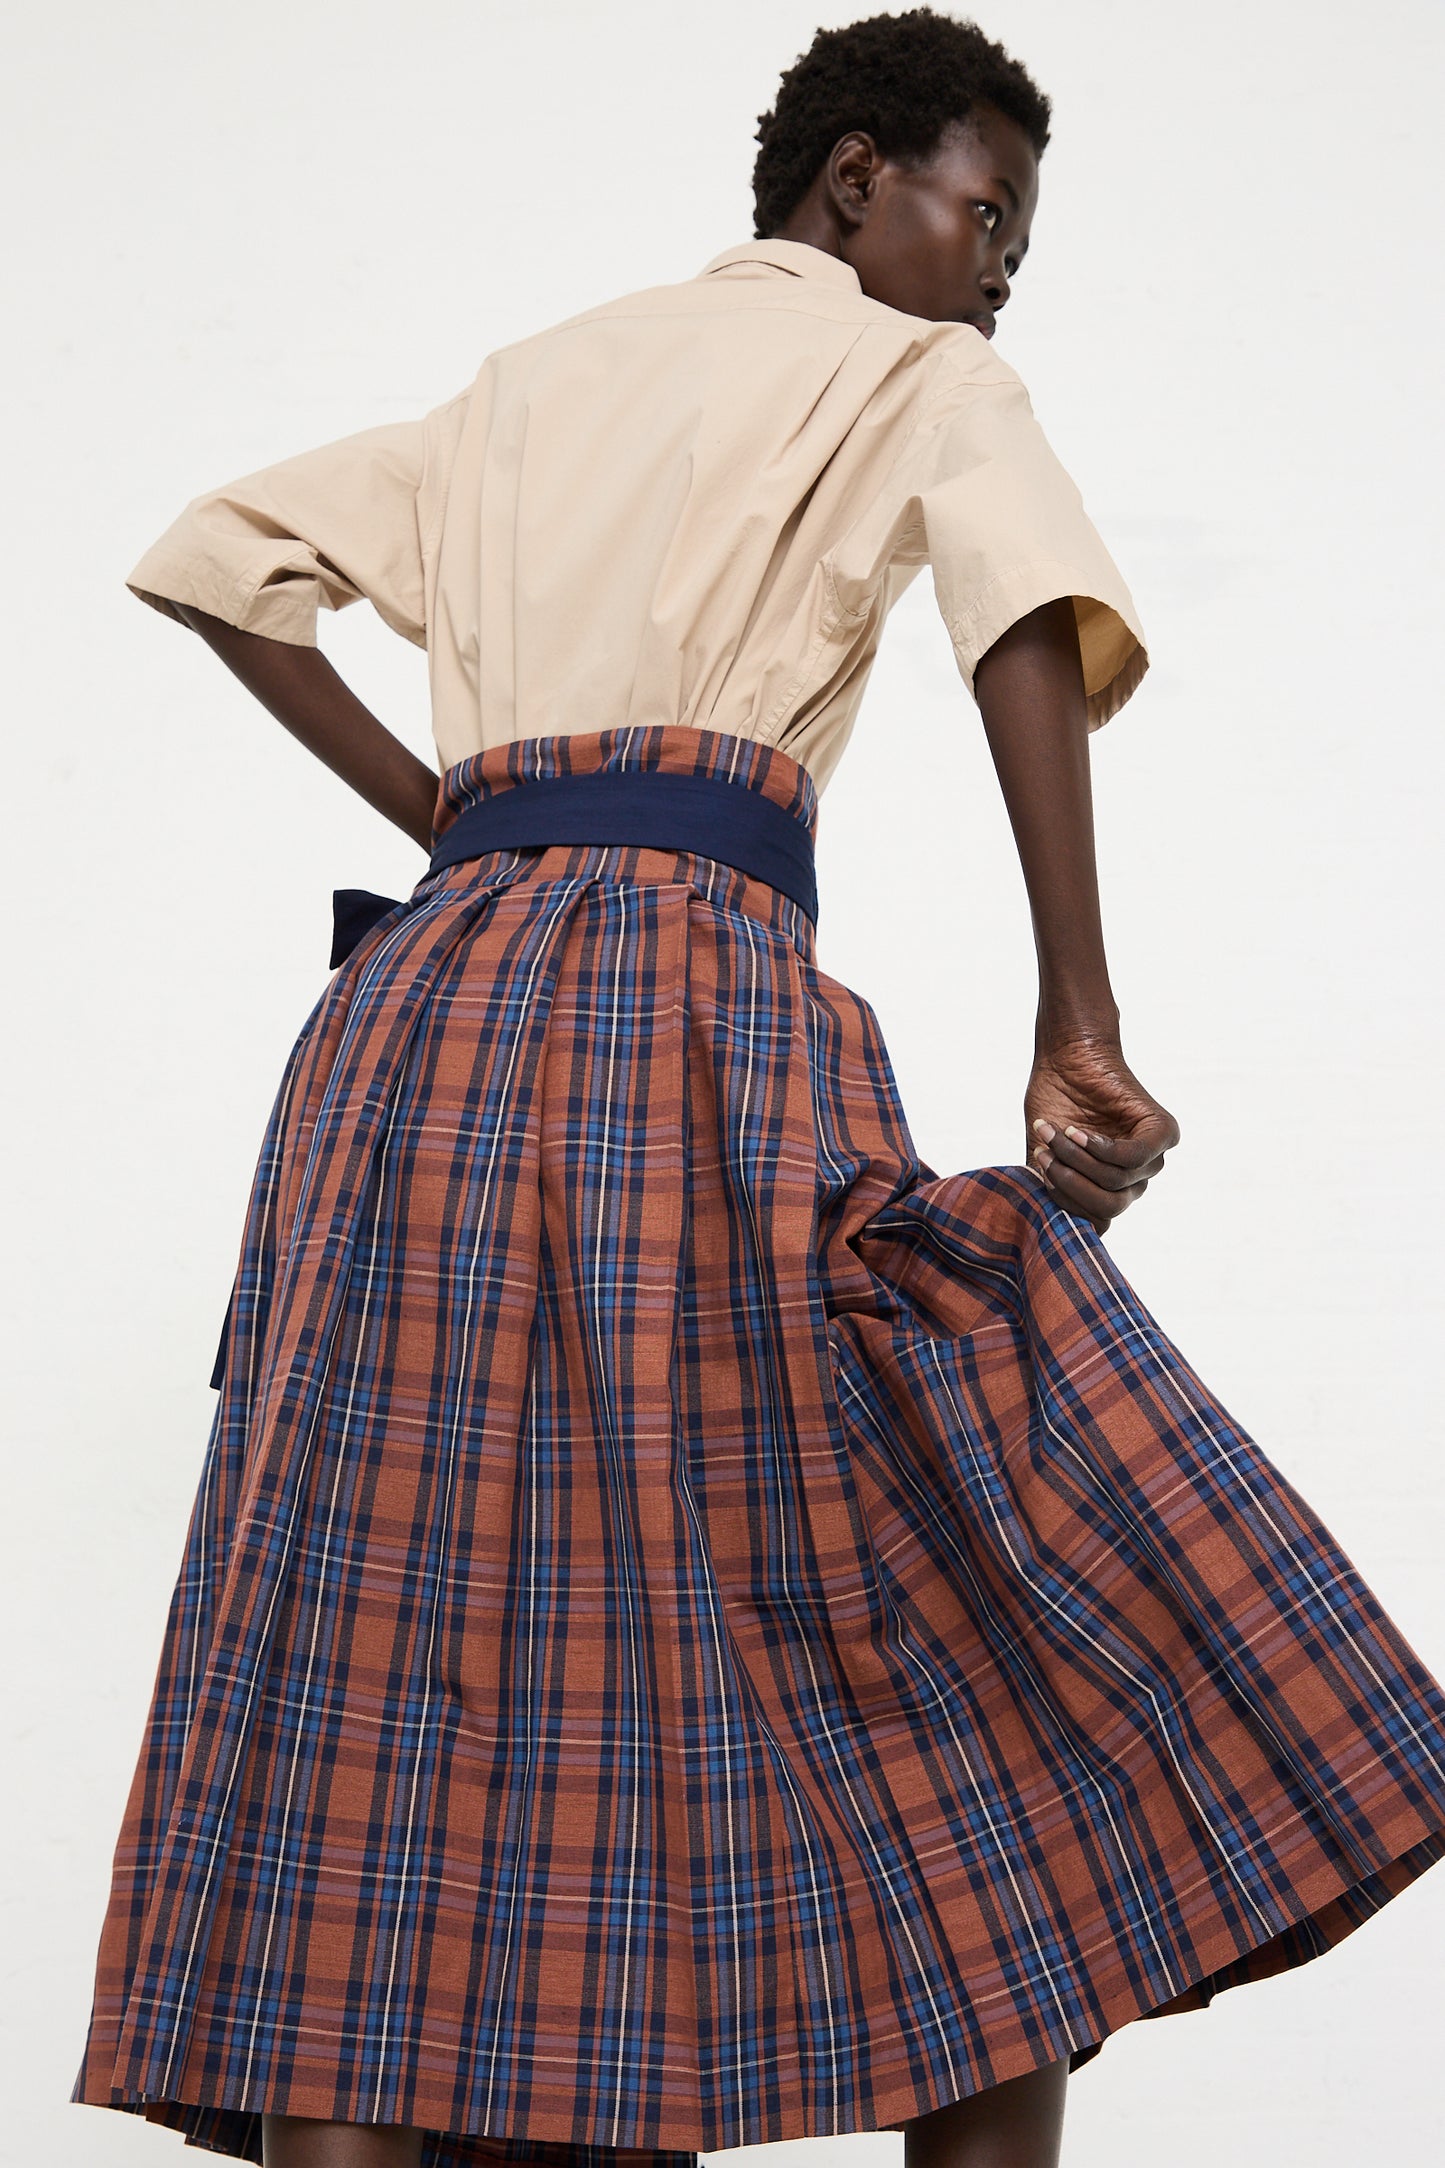 Person wearing a beige shirt and an a-line silhouette, Toujours Cotton Linen Madras Plaid Cloth Pleated Wrap Maxi Skirt in Brick, shown from the back, slightly lifting the skirt with their left hand.